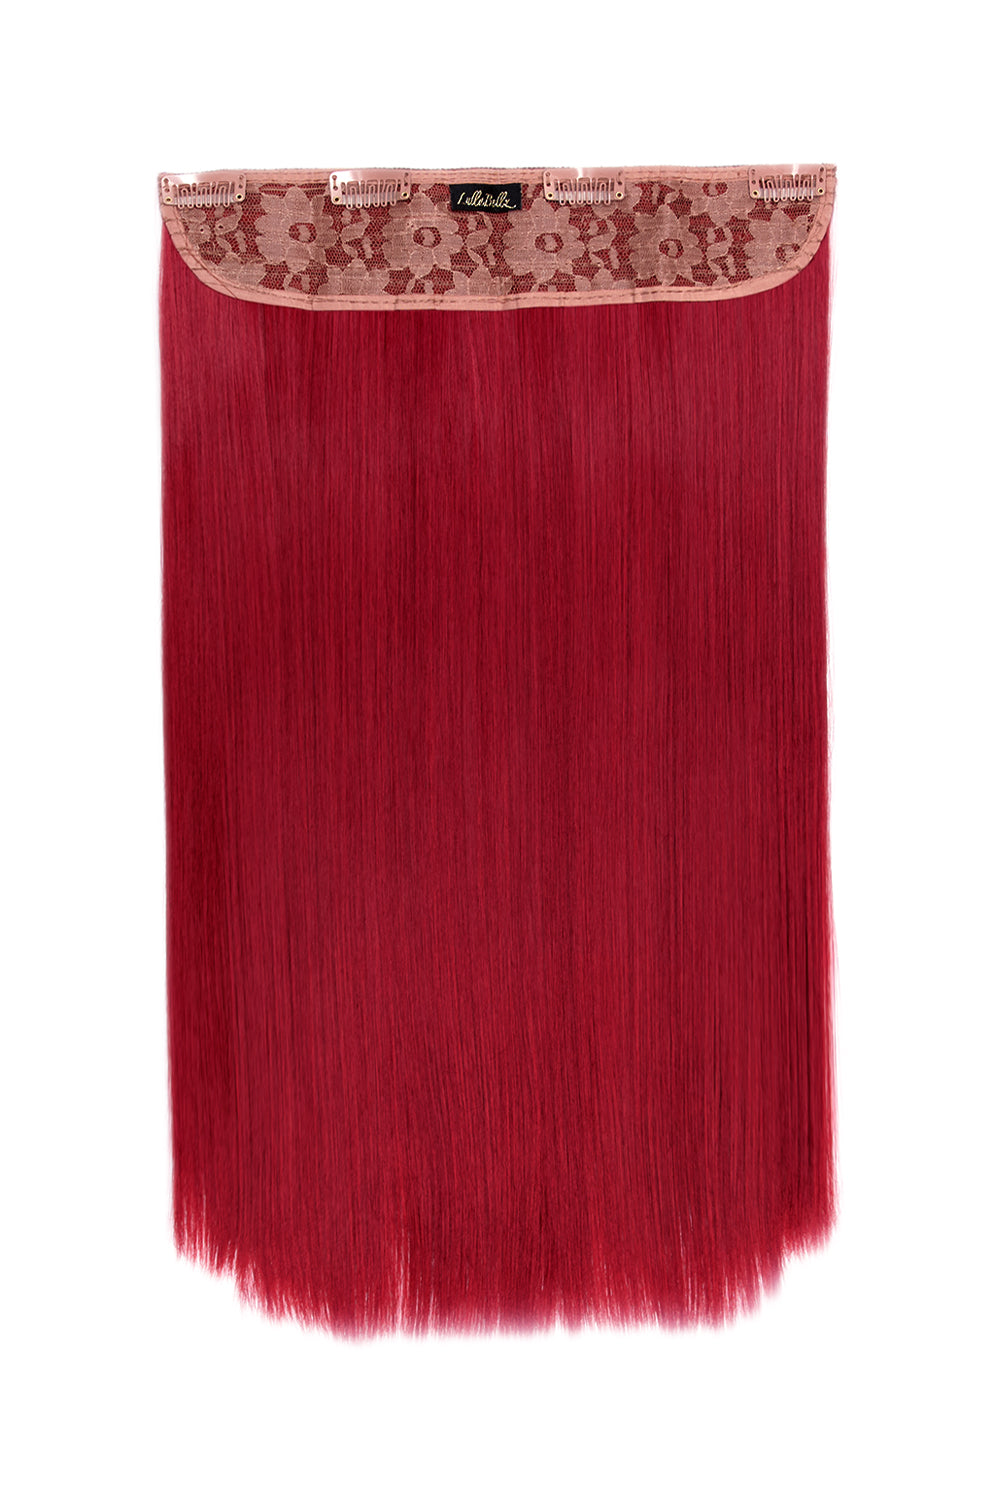 Thick 18" 1 Piece Straight Synthetic Clip In Hair Extensions - LullaBellz  - Burgundy Ruby Red